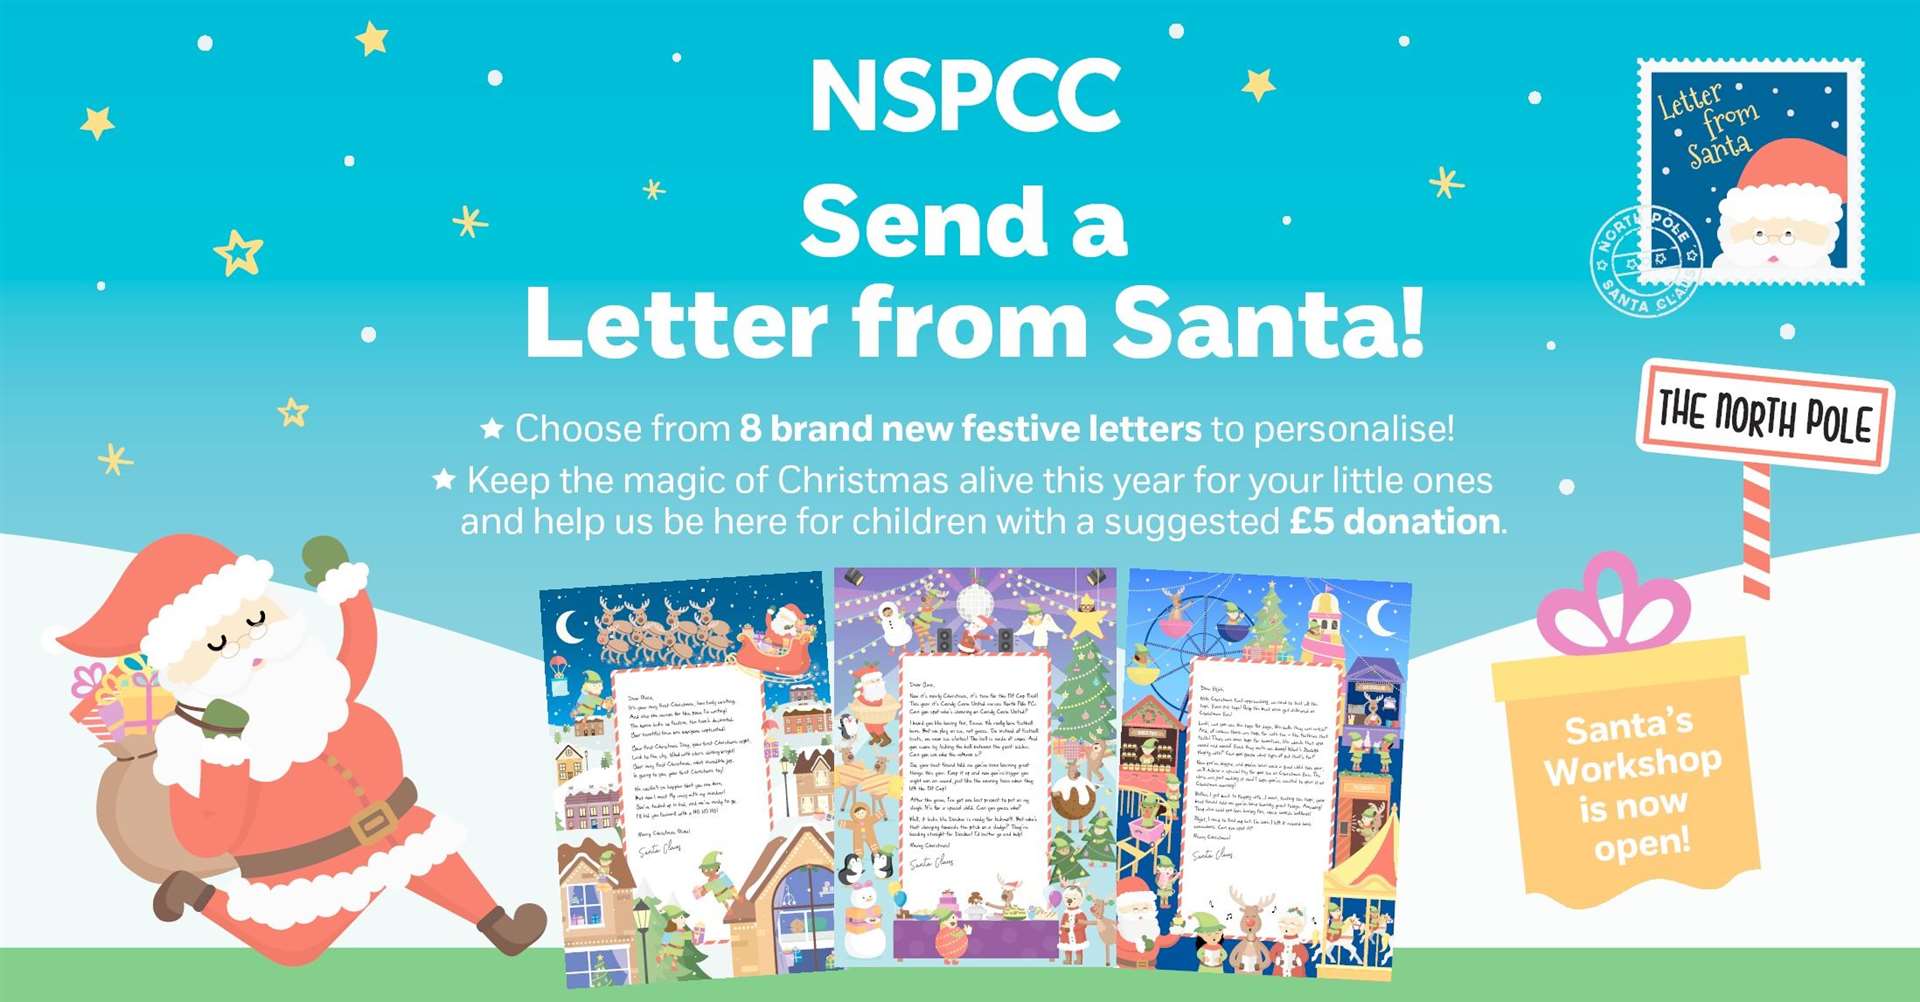 Santa has teamed up with the NSPCC to help it raise some much needed funds after a difficult year